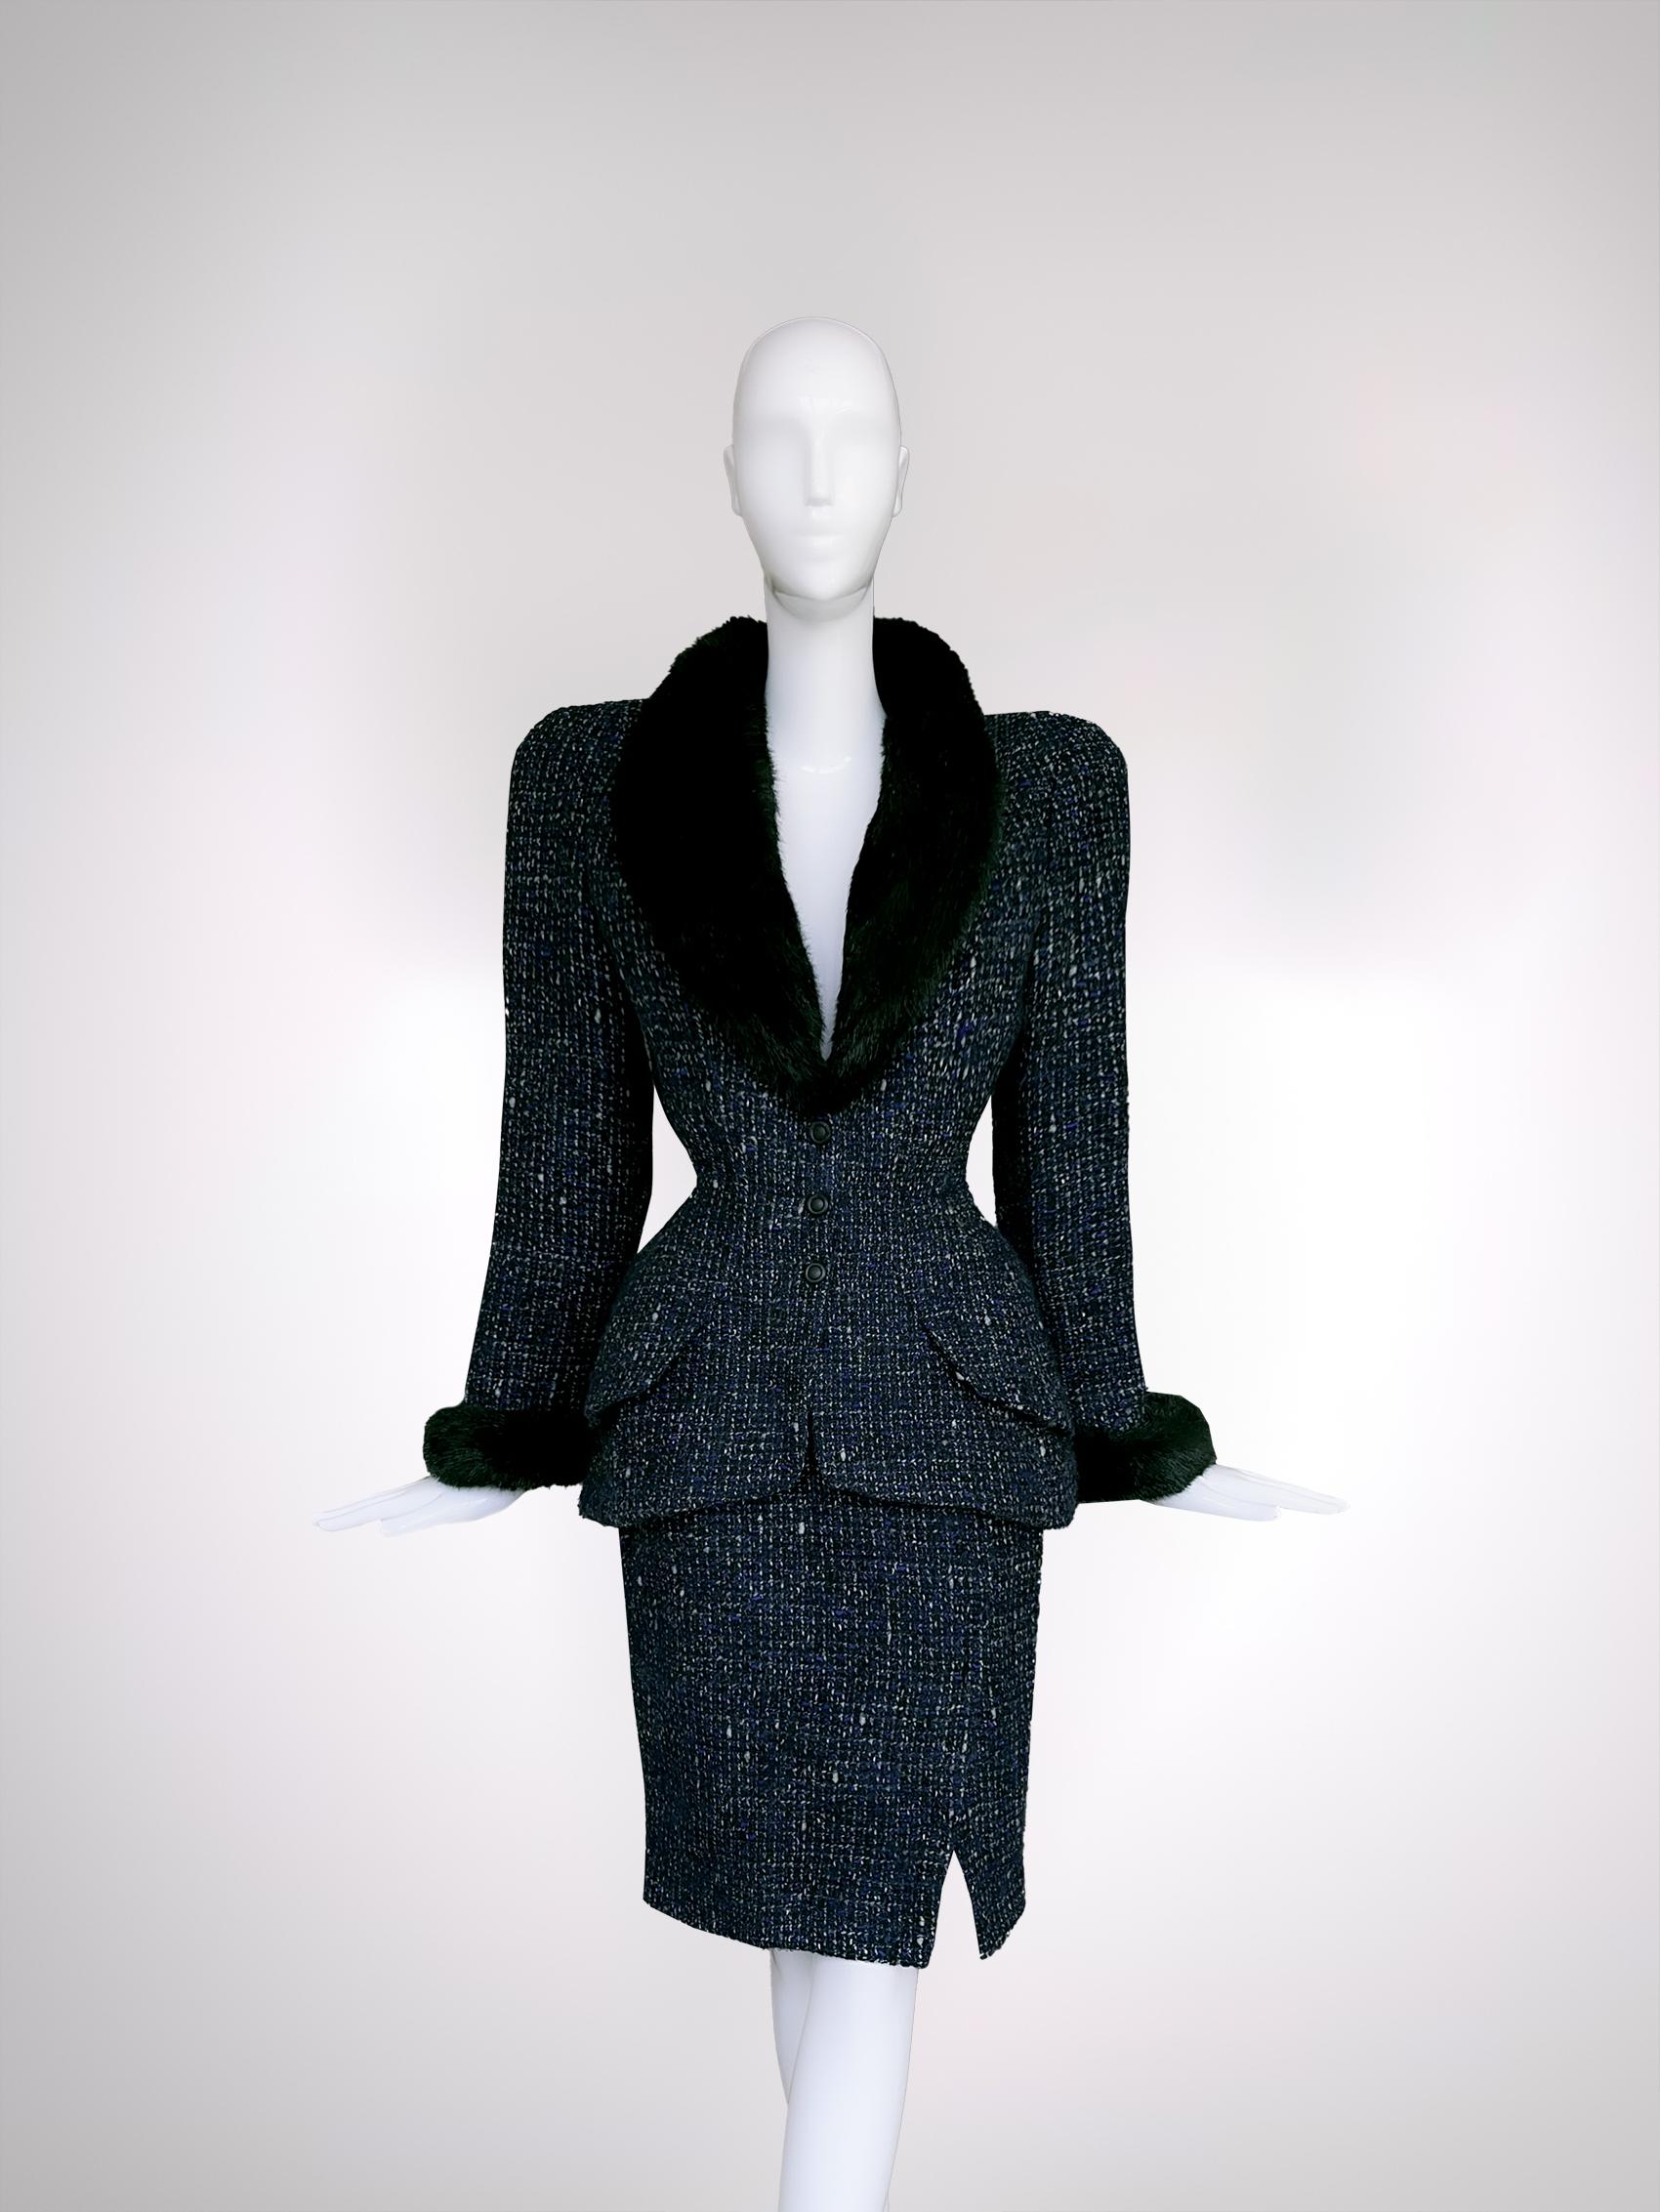 Rare Thierry Mugler FW1998 Archival Skirt Suit Tweed Jacket  For Sale 6